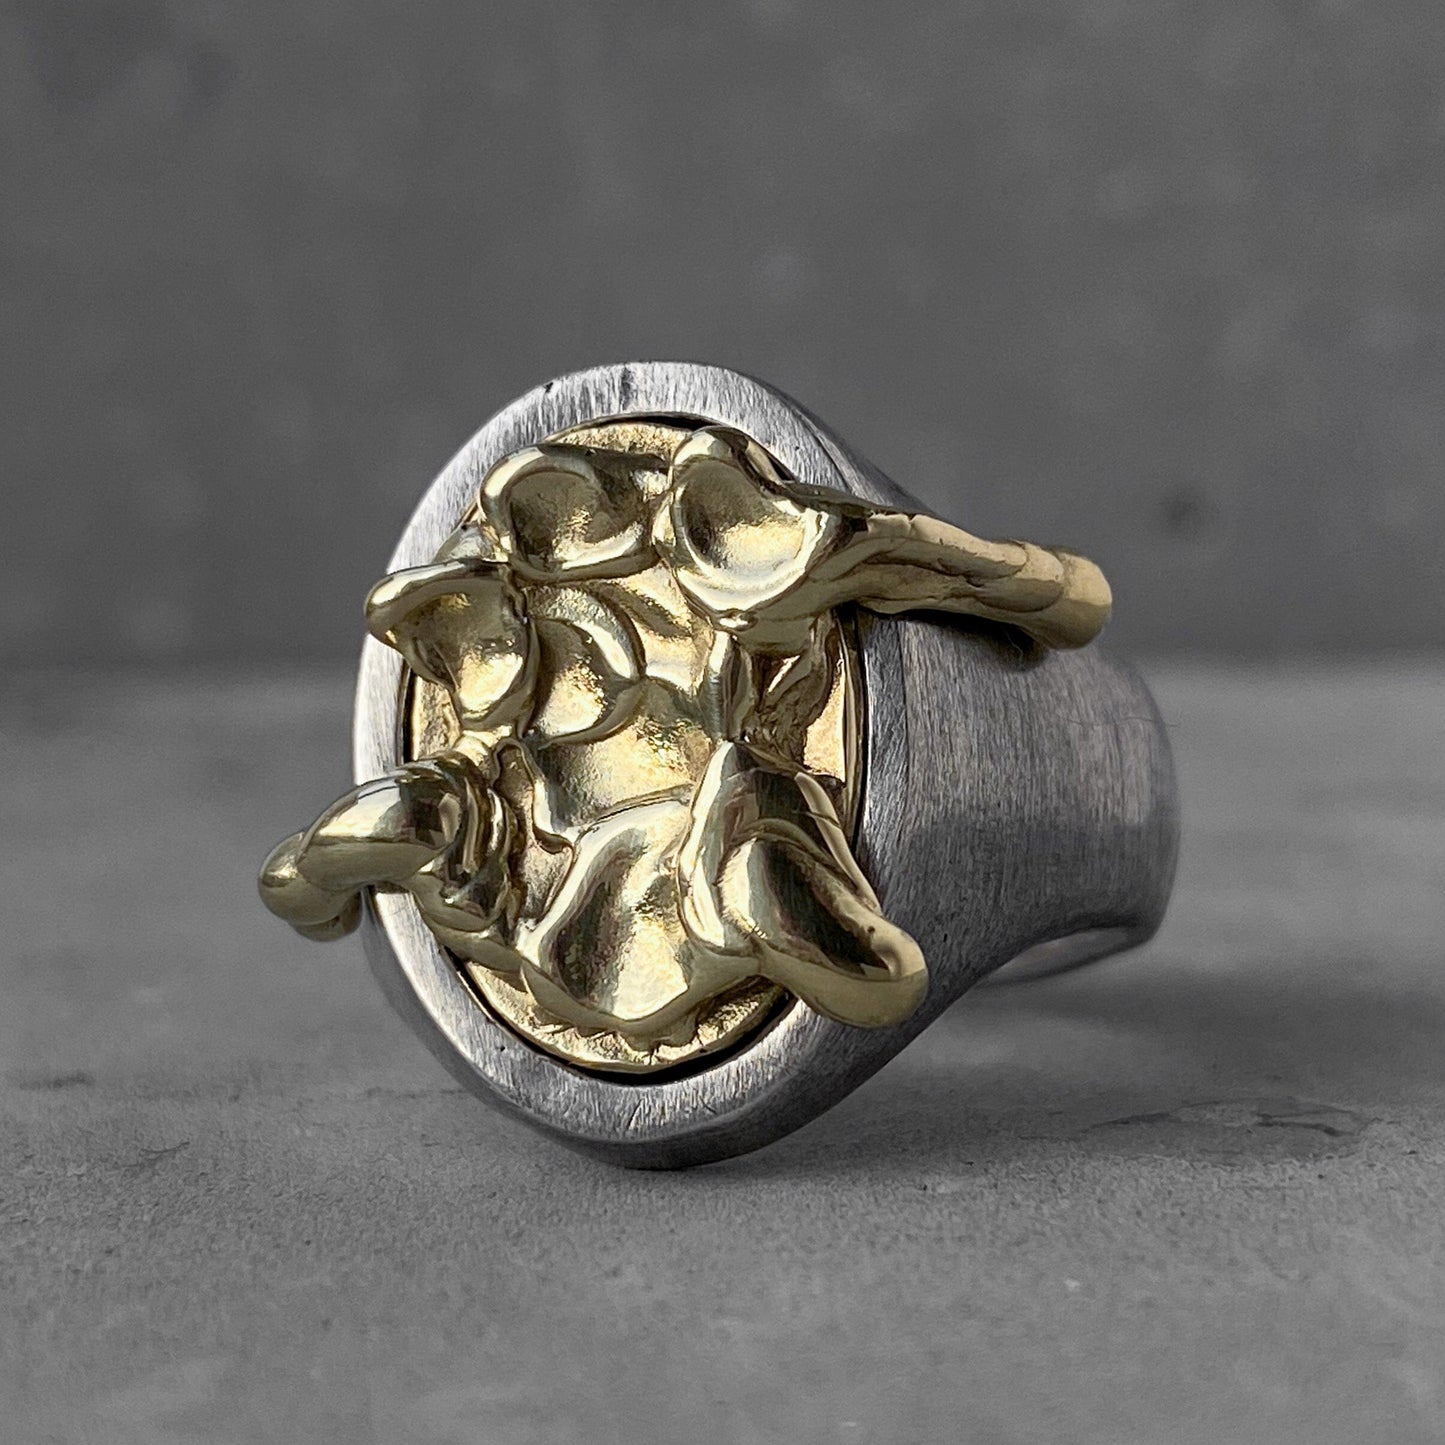 Silver Lava ring- Oval Signet Ring with Matte Texture and Molten Metal Top (Silver) Unusual rings Project50g 12 1/2 no silver+brass